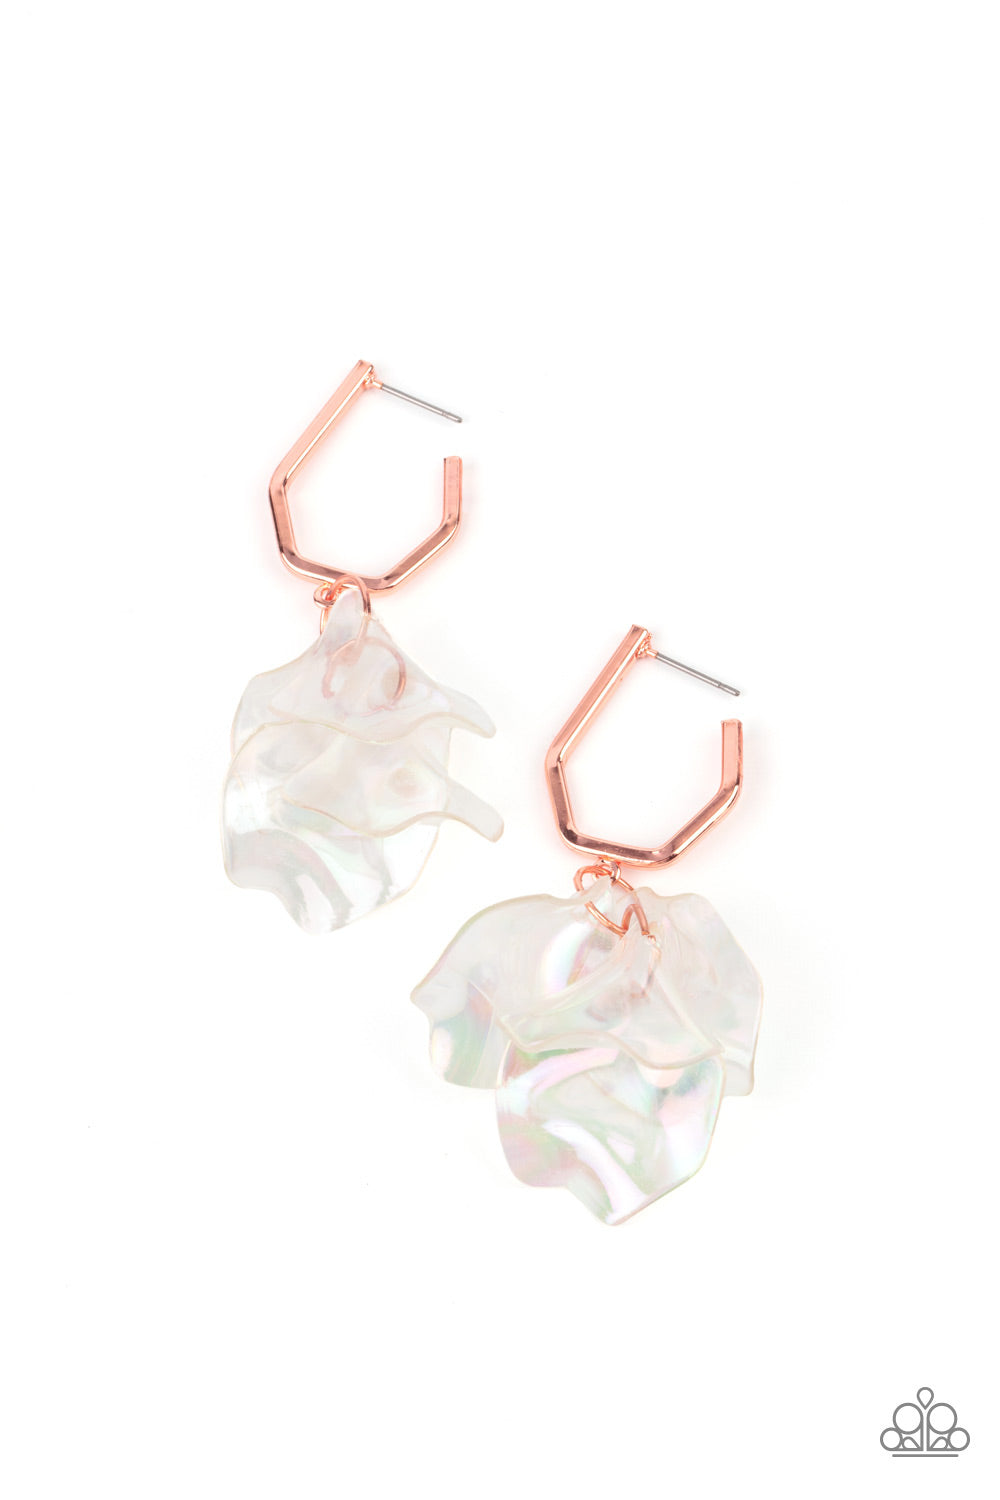 Paparazzi Jaw-Droppingly Jelly - Copper Earrings - A Finishing Touch Jewelry